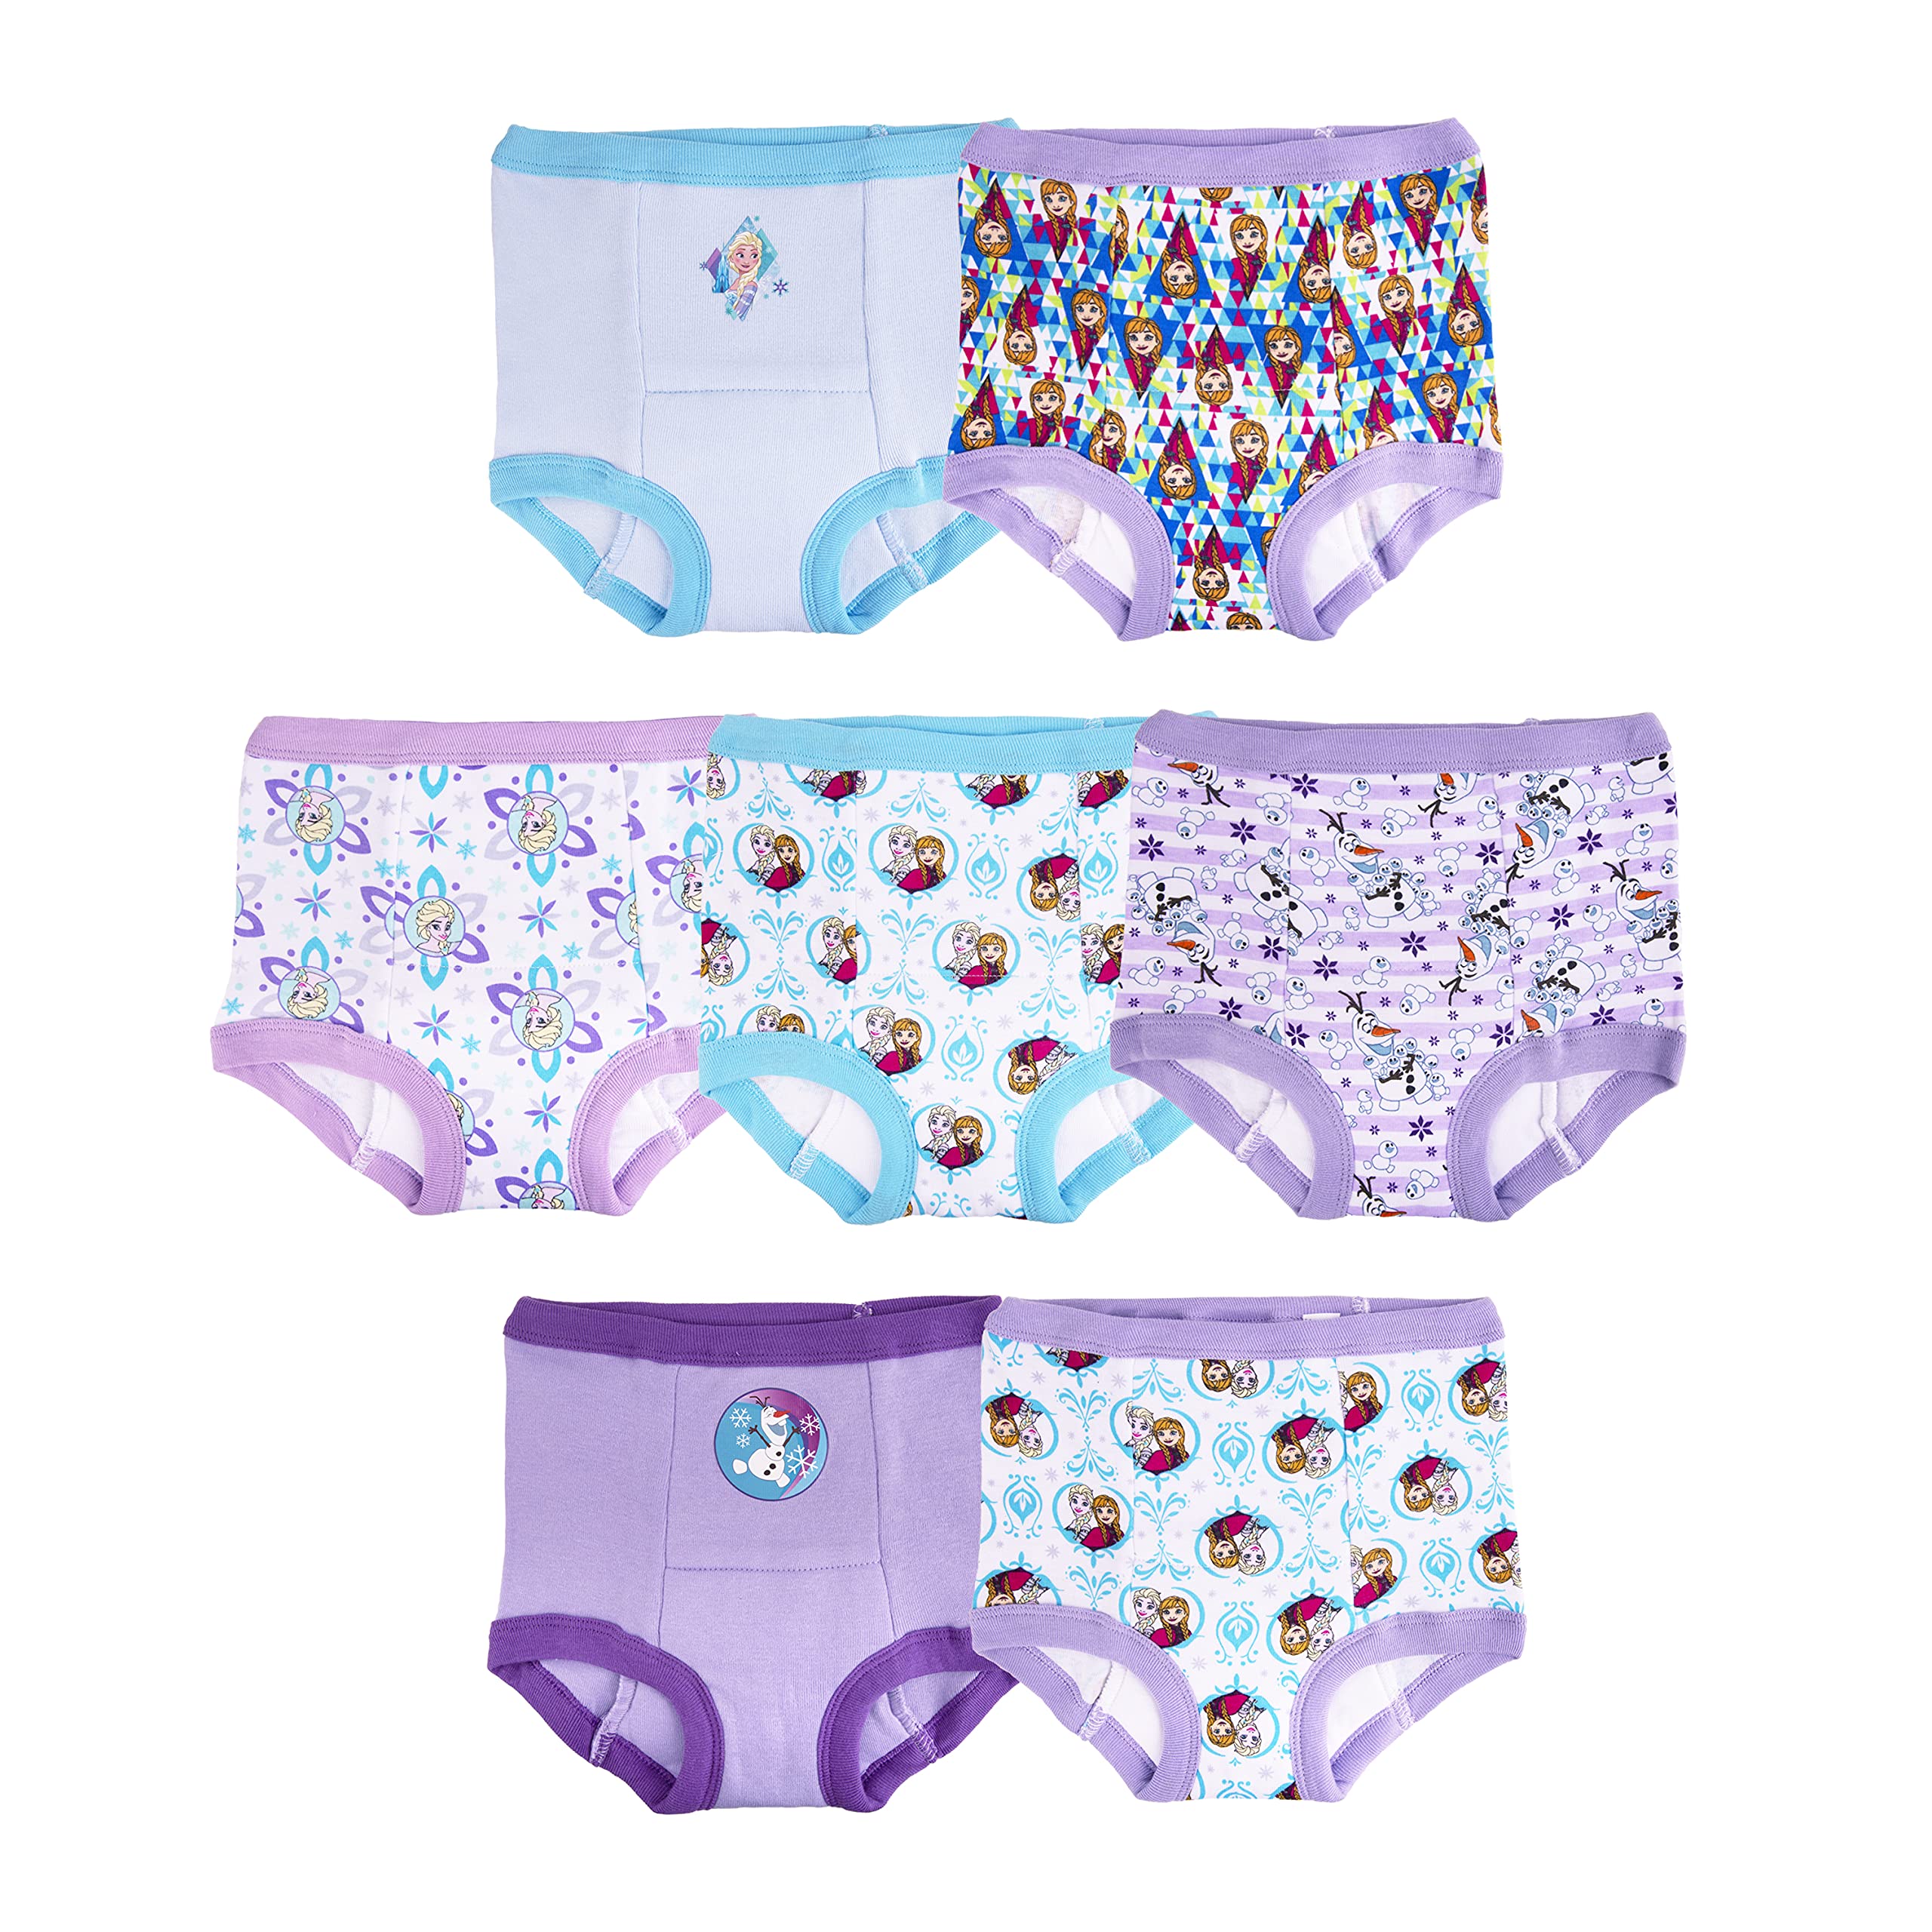 Paw Patrol Girls' 100% Combed Cotton 10-Pack Underwear Available